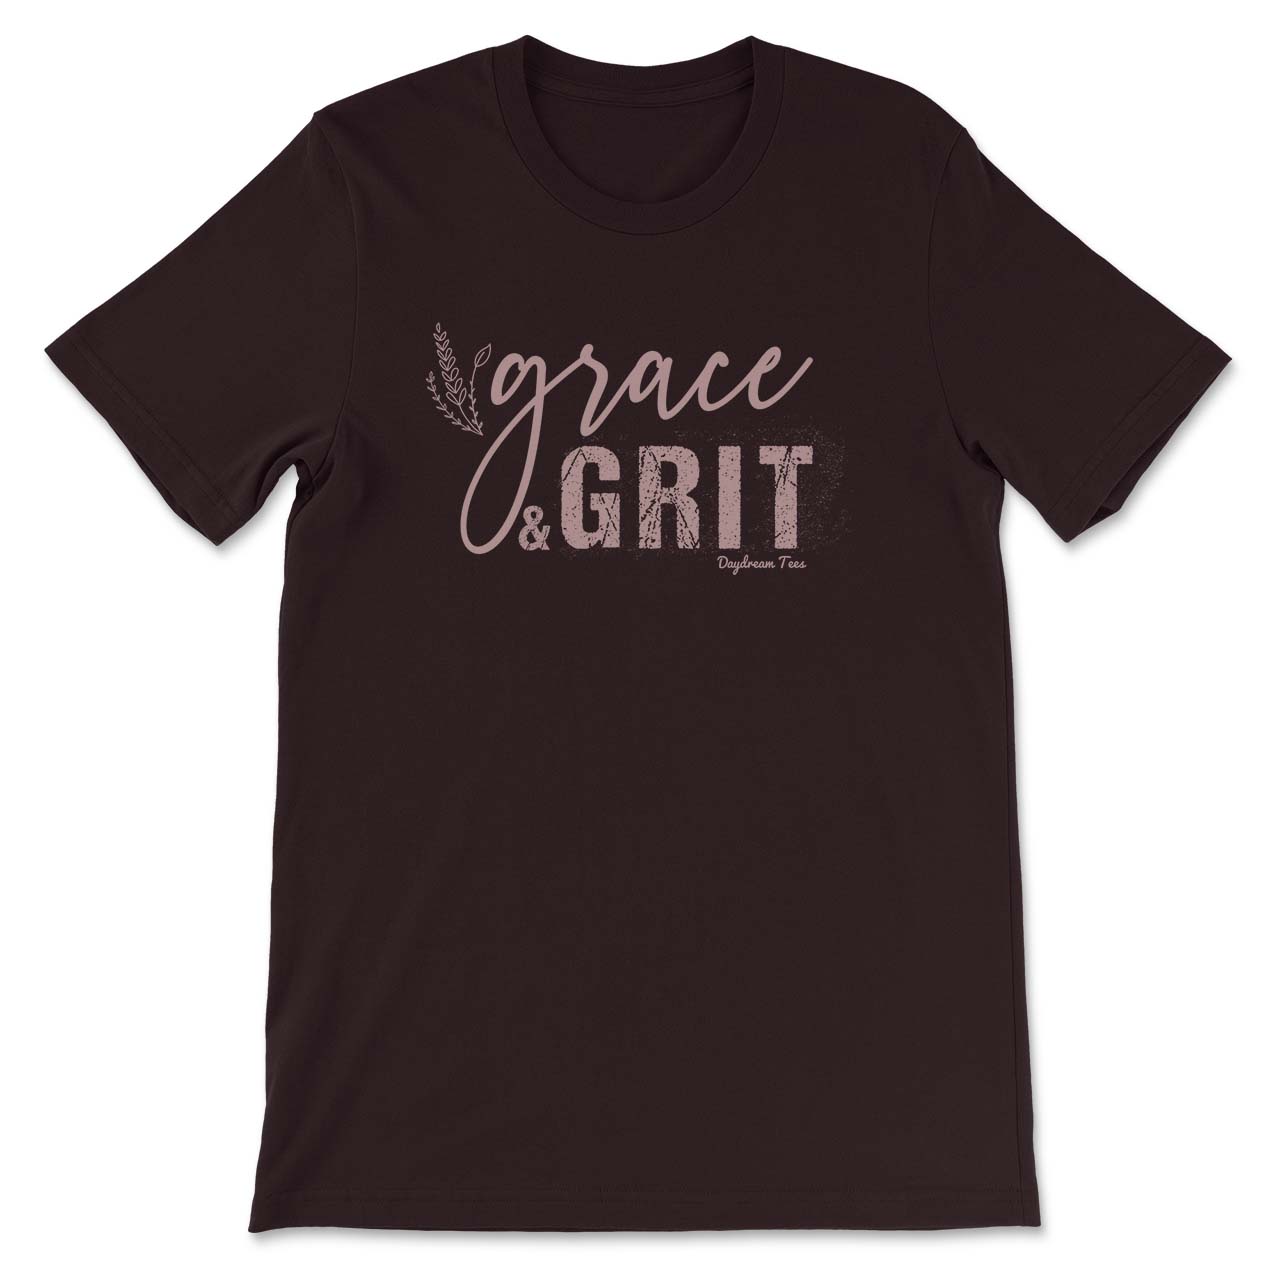 Daydream Tees Grace & Grit